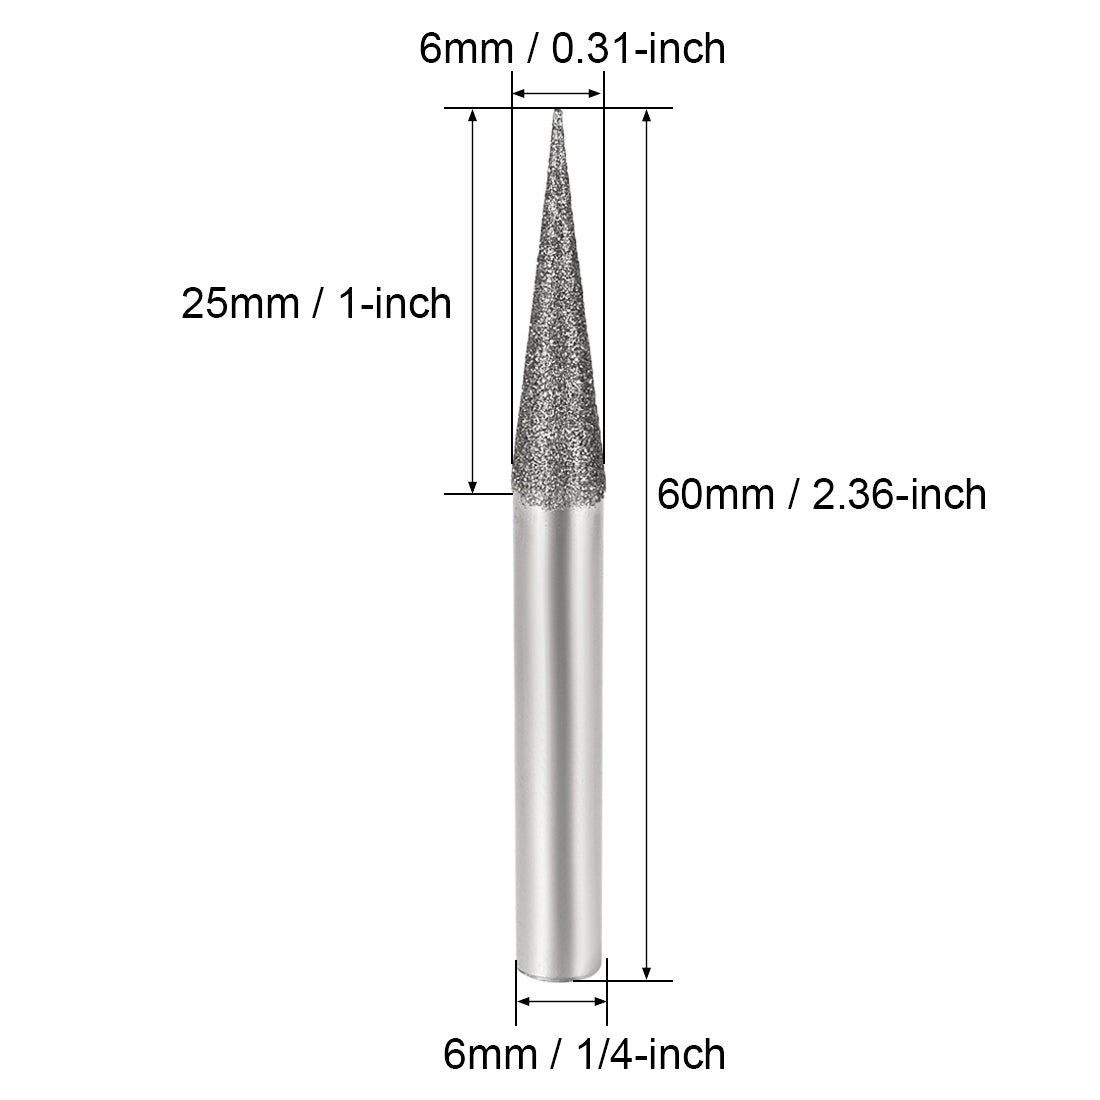 uxcell Uxcell Diamond Burrs Grinding Drill Bits for Carving Rotary Tool 1/4-Inch Shank 6mm Pointed 150 Grit 2 Pcs